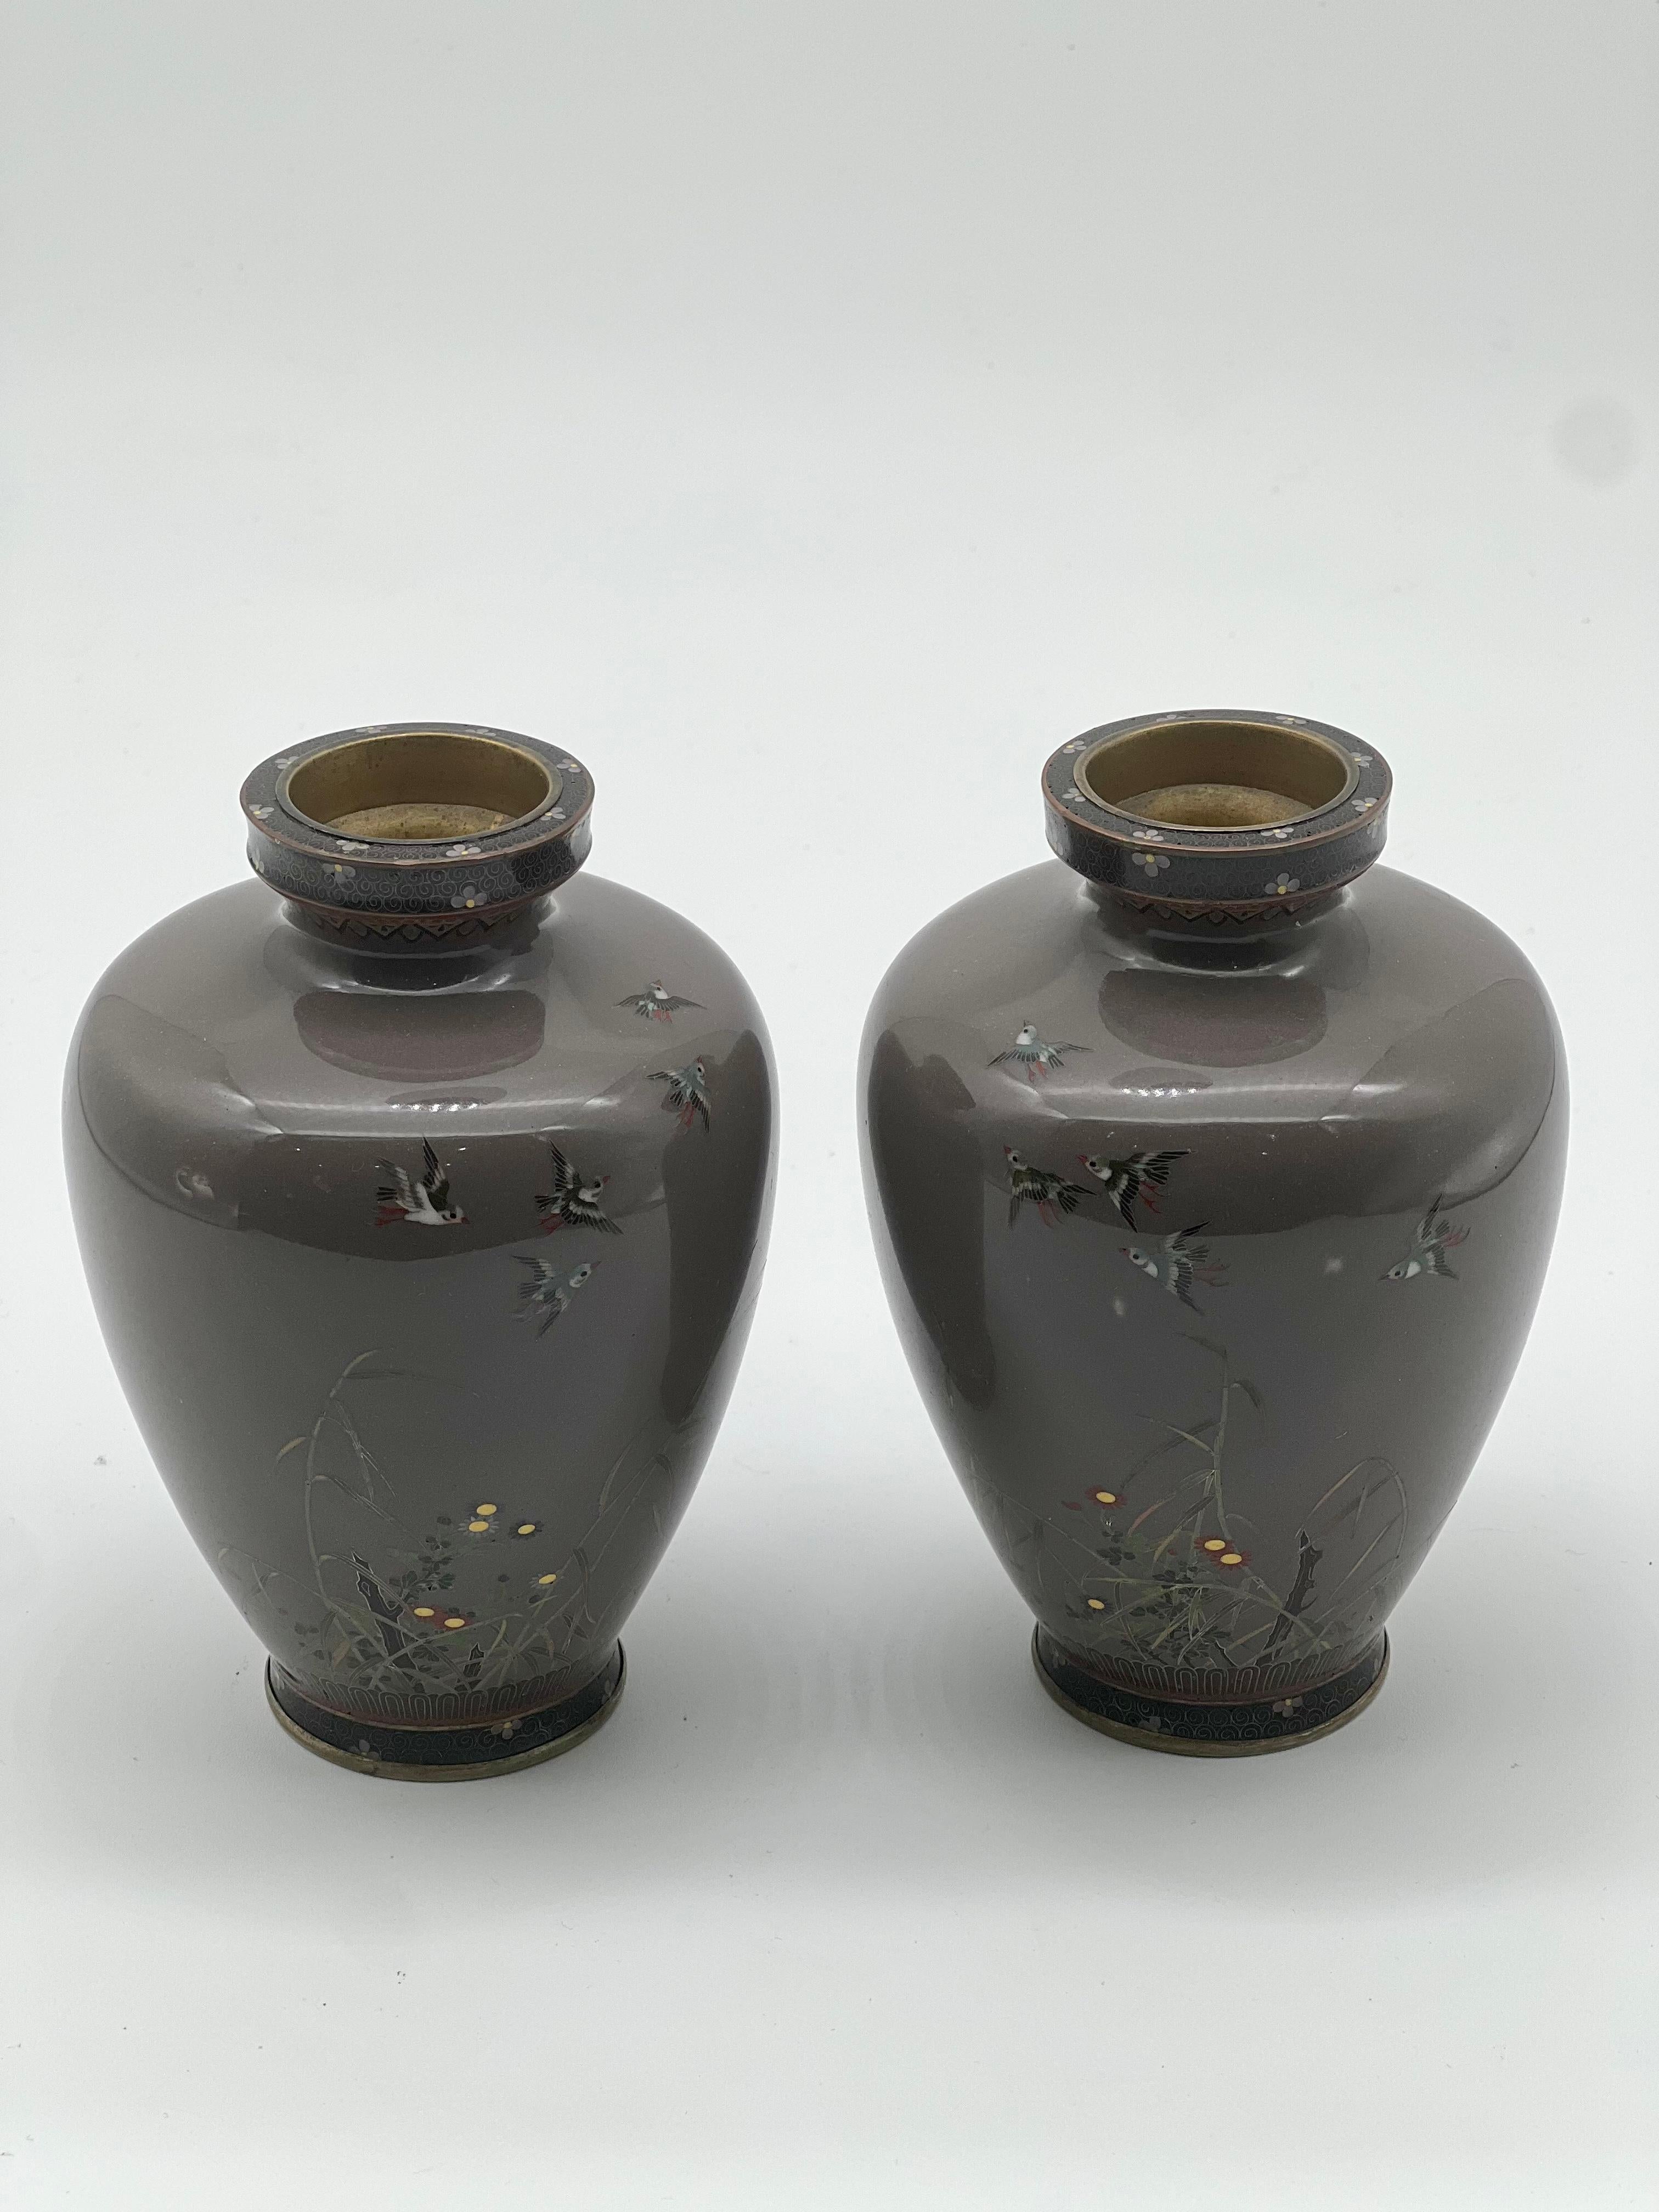 A Fine Pair of Japanese Cloisonne Enamel Vases Attributed to Hayashi Kodenji For Sale 13